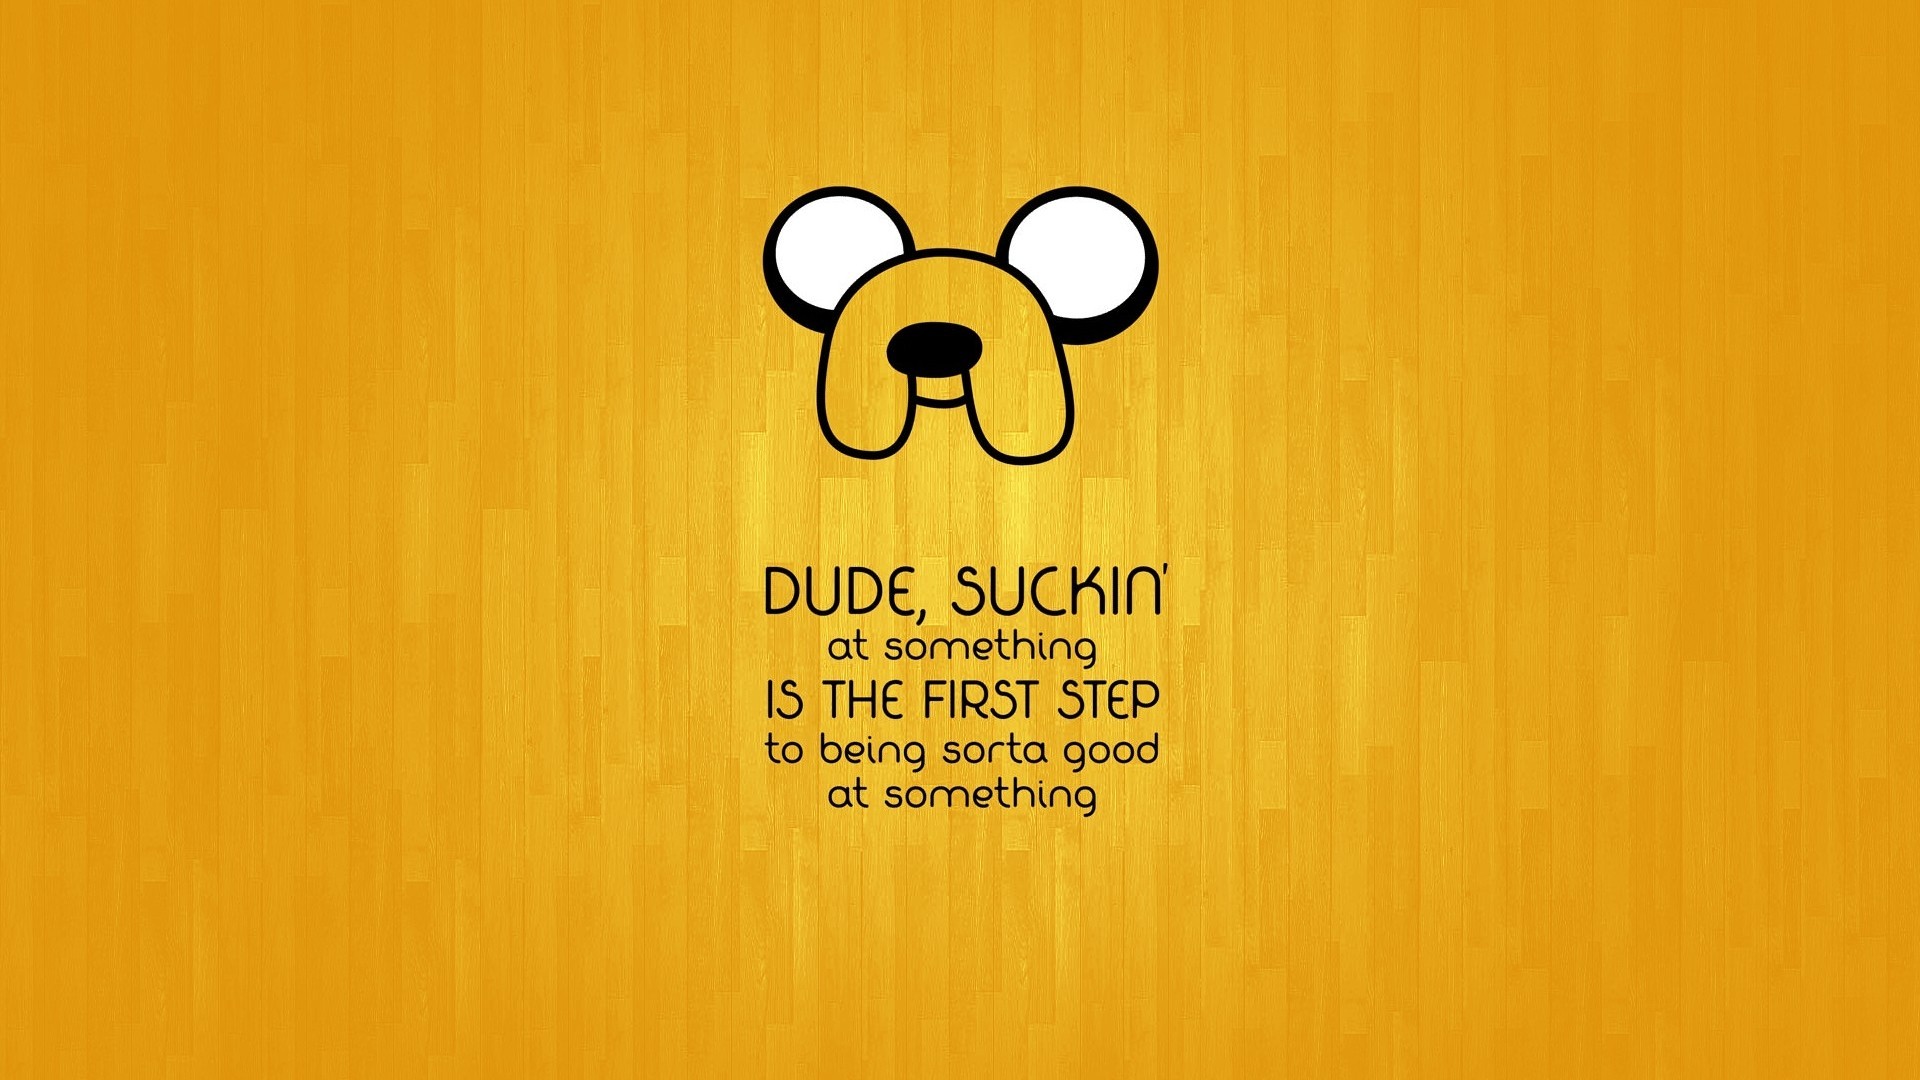 Wallpaper, illustration, quote, anime, text, logo, yellow, cartoon, motivational, circle, brand, Adventure Time, Jake the Dog, computer wallpaper, font 1920x1080